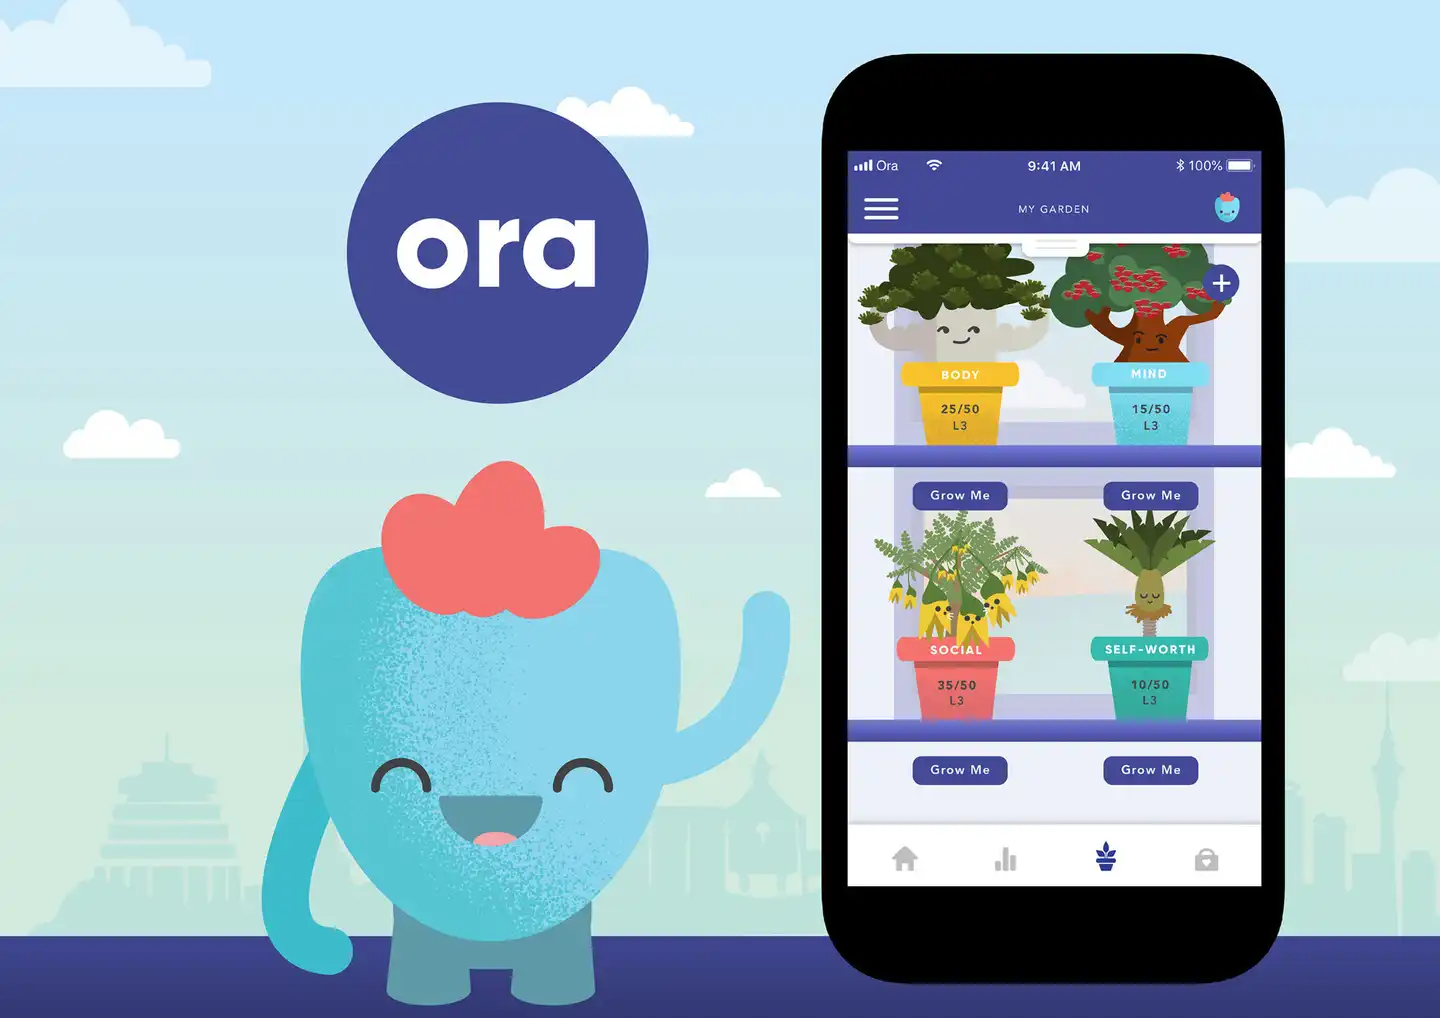 An image of the Ora project